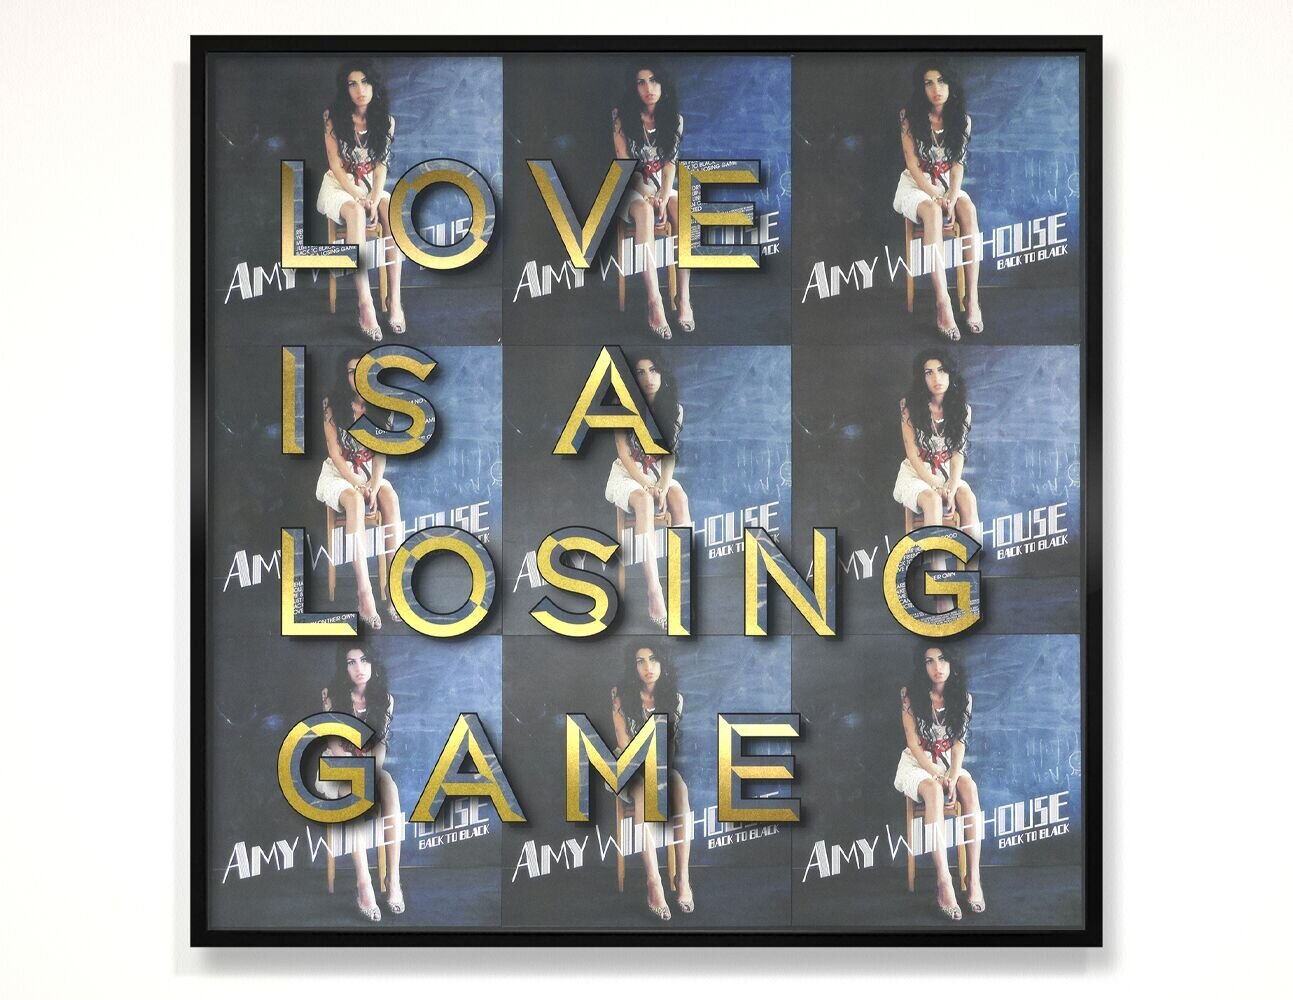 Love Is A Losing Game